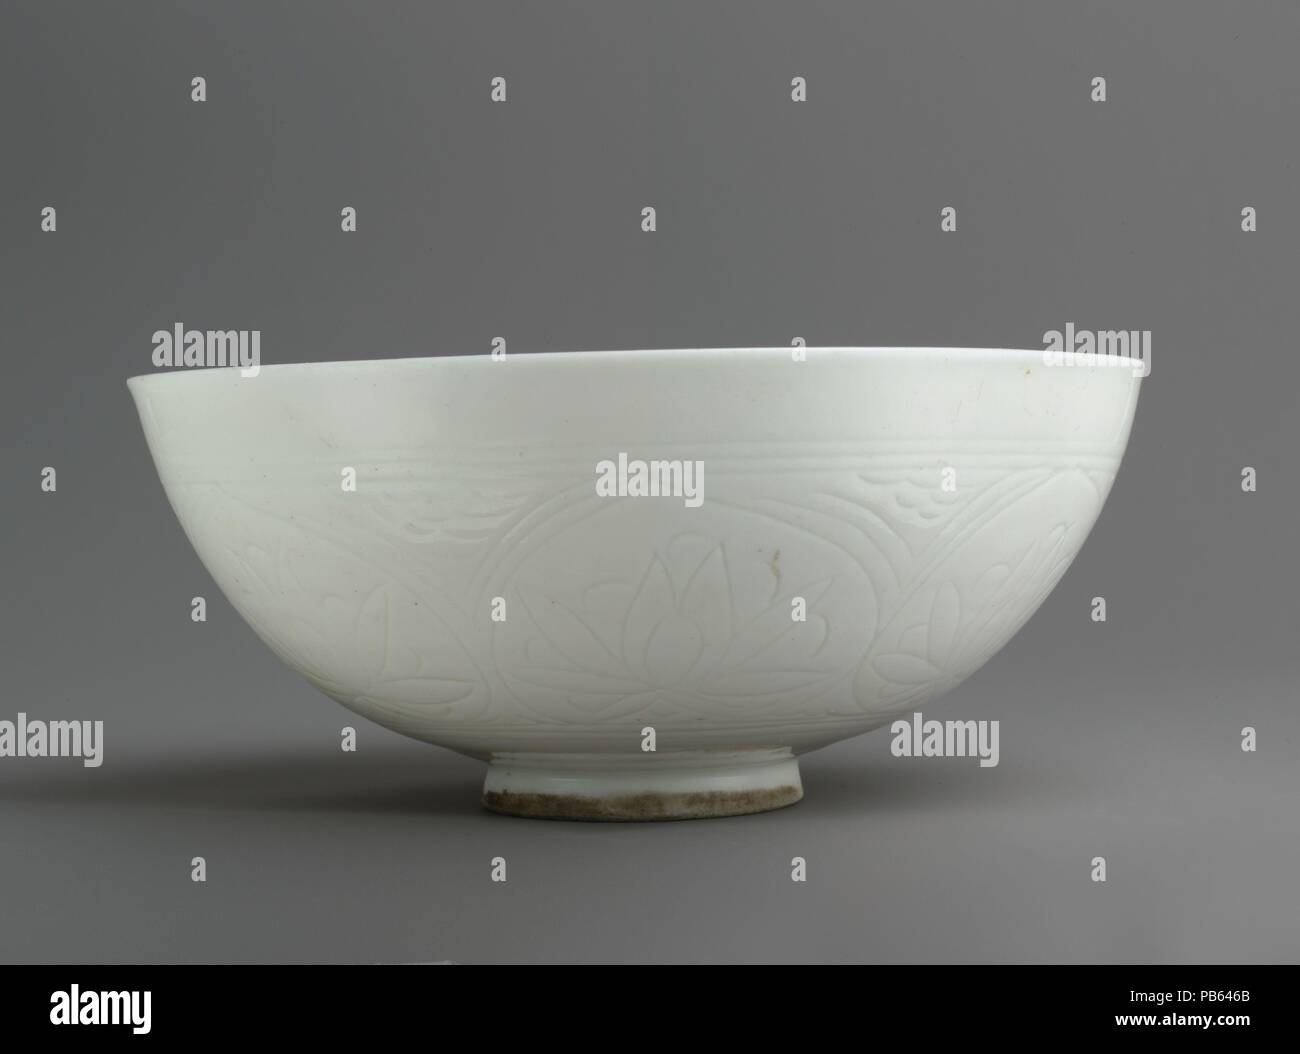 Bowl with Incised Lotus Flowers. Dimensions: H. 3 3/8 in. (8.6 cm)  Diam. 7 7/8 in. (20 cm). Date: second half 17th century or later.  This bowl along with a bottle (91.1.131) are part of a group of Iranian ceramics known as Gombroon ware, named after a trading post on the south coast of Iran. Ideally situated, the port was frequented by both the Dutch and English East India Companies and served as an entrepot for ceramics and other luxury goods into Europe. The style of Gombroon ceramics and their role in international trade reflect the significant artistic, cultural, and economic ties that e Stock Photo